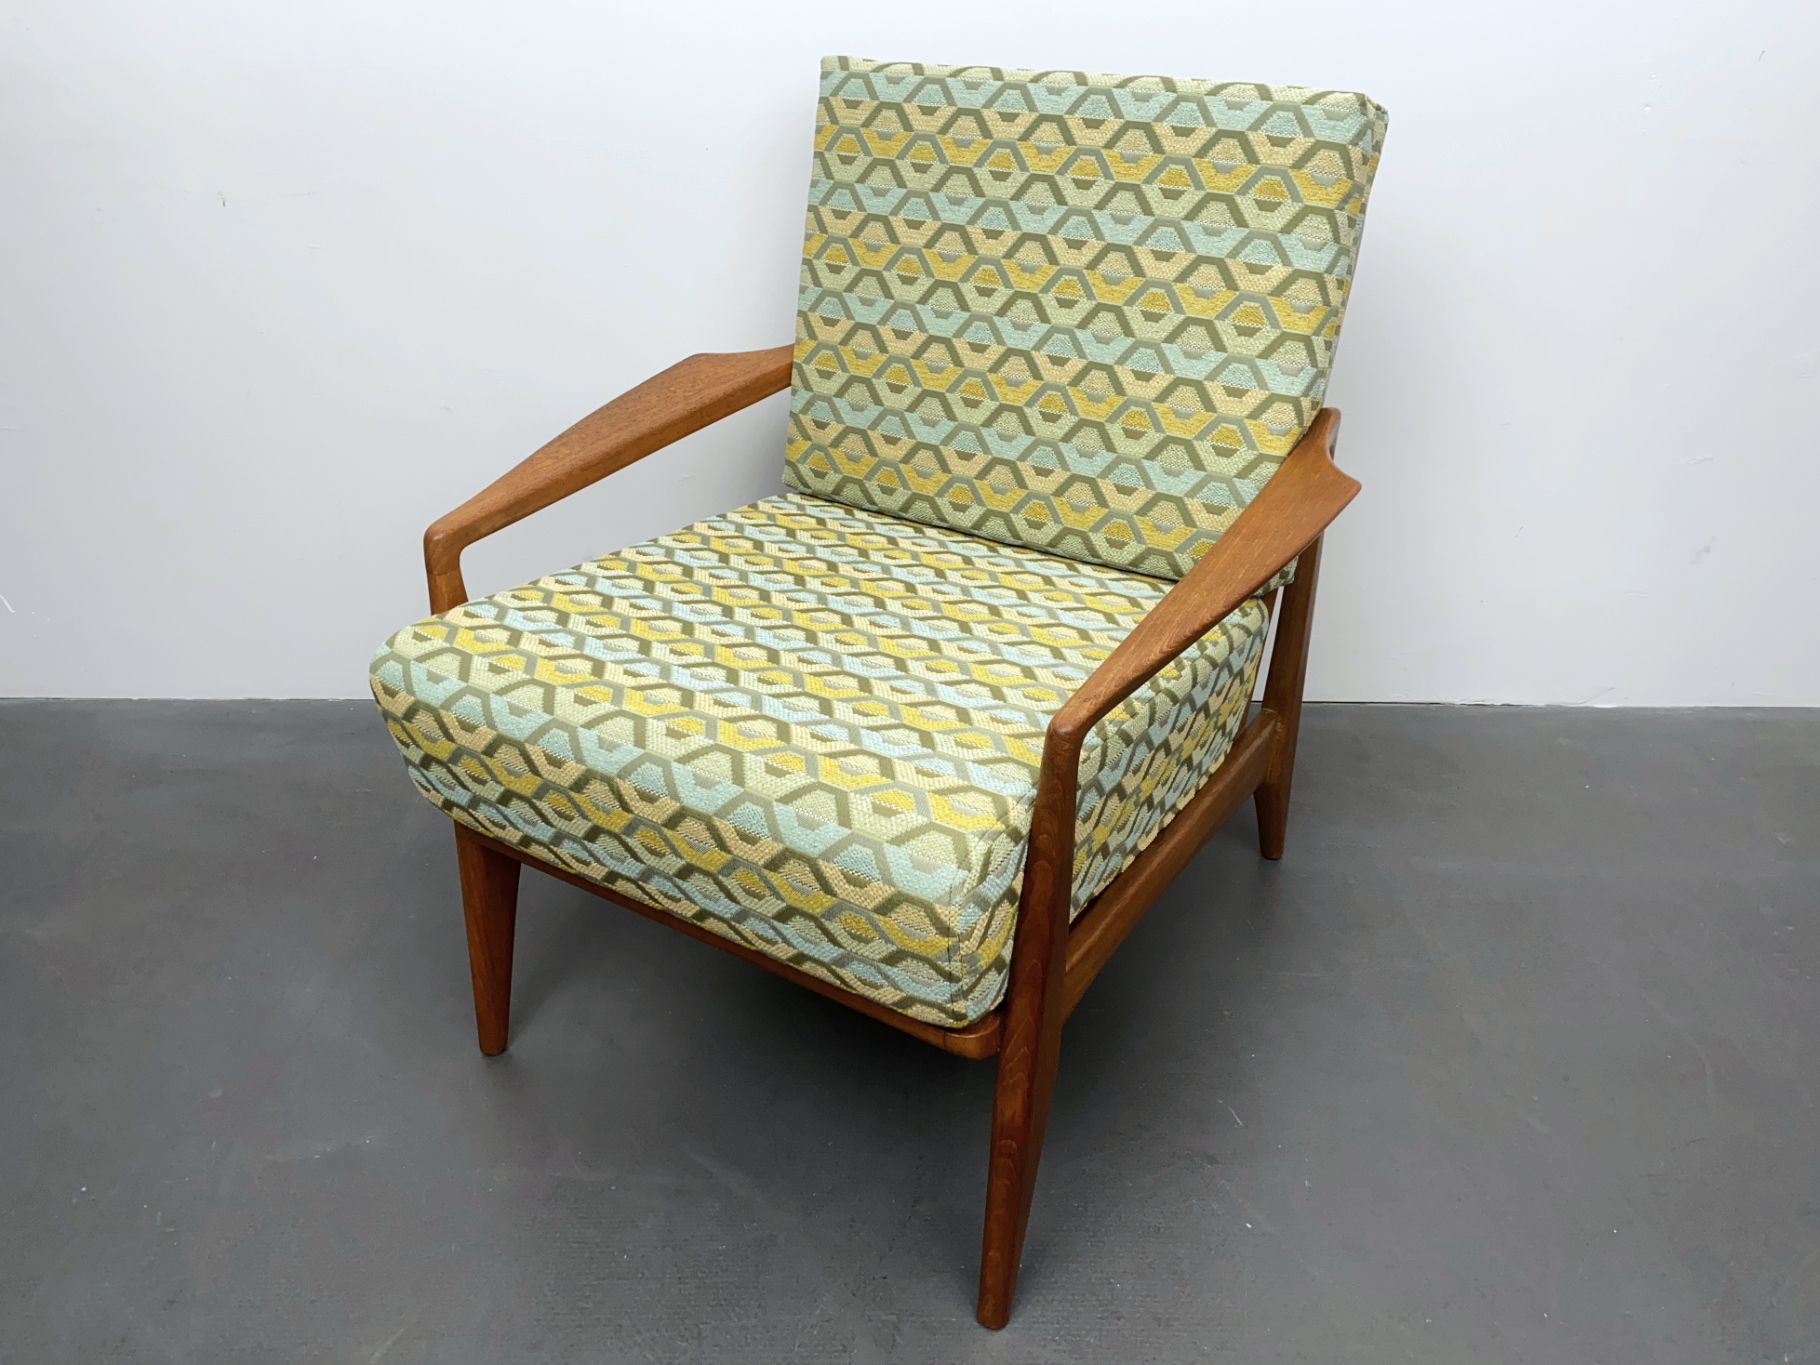 Armchair, Teak Wood, Germany, 1950s . Reupholstered and new covered.